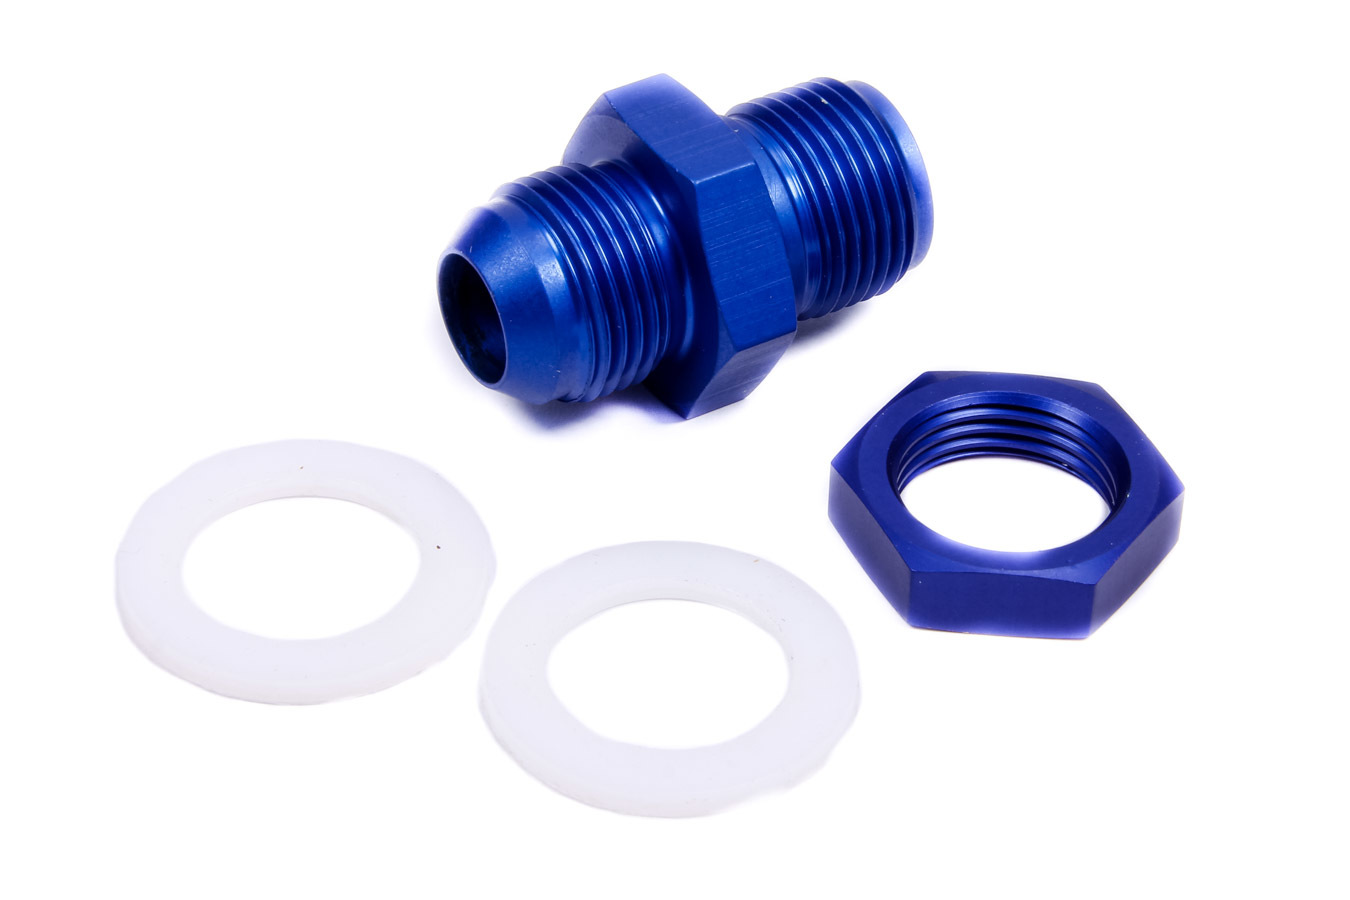 JAZ Products 832-112-11 Fitting, Bulkhead, Straight, 12 AN Male to 12 AN Male Bulkhead, PTFE Gaskets Included, Aluminum, Blue Anodized, JAZ Fast Flow Fuel Cells, Each